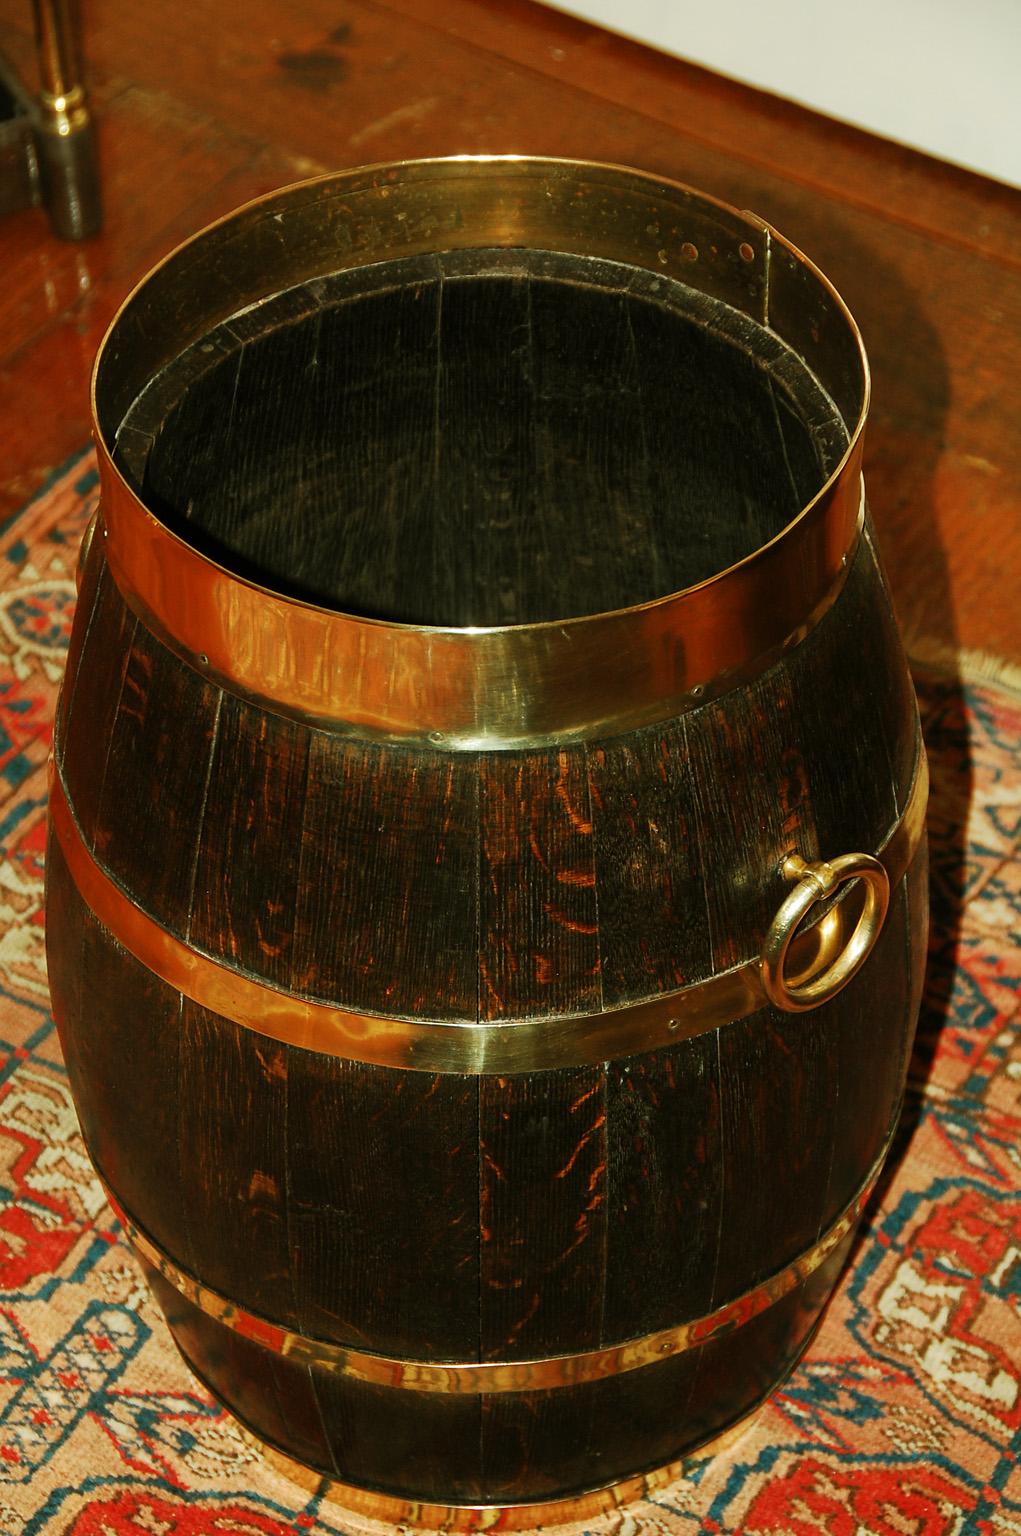 English Victorian brass bound oak coopered barrel umbrella stand or stick stand, with side ring handles. The oak in this barrel retains a lovely patination which is highlighted by the substantial brass banding that is well polished. The last photo